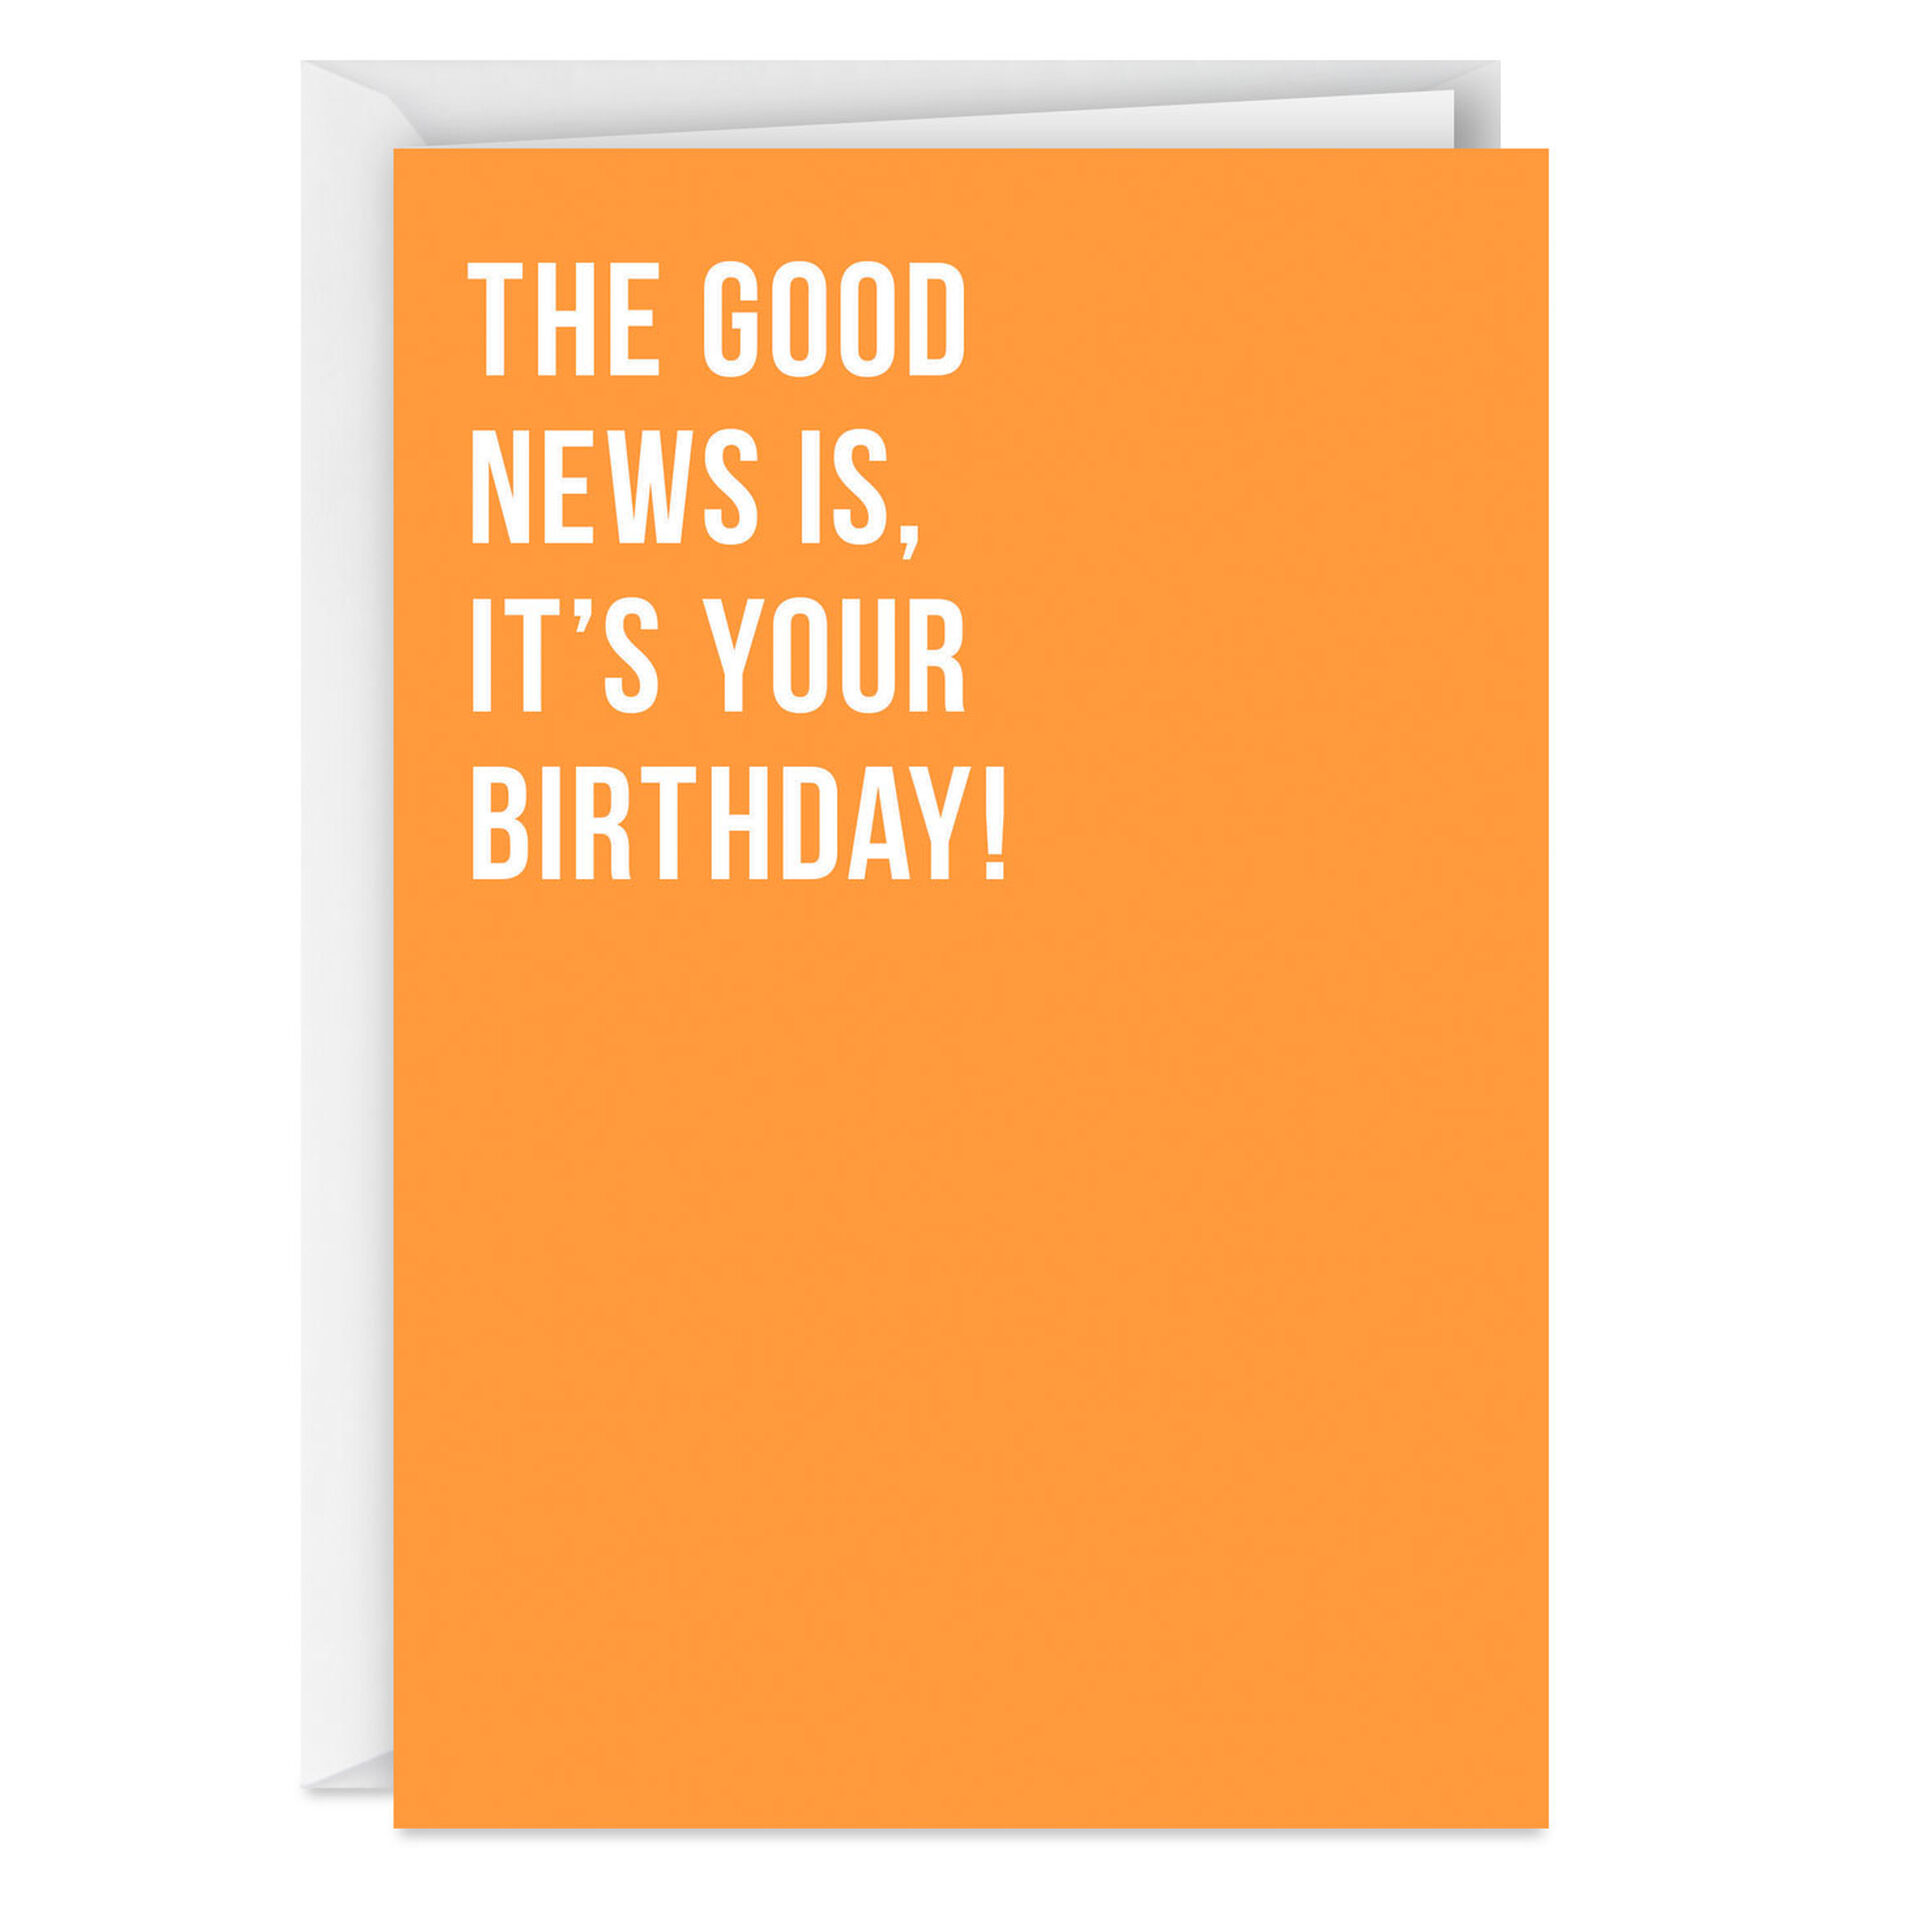 Good-&-Bad-News-Lettering-on-Orange-Funny-Birthday-Card_369ZZB4086_01